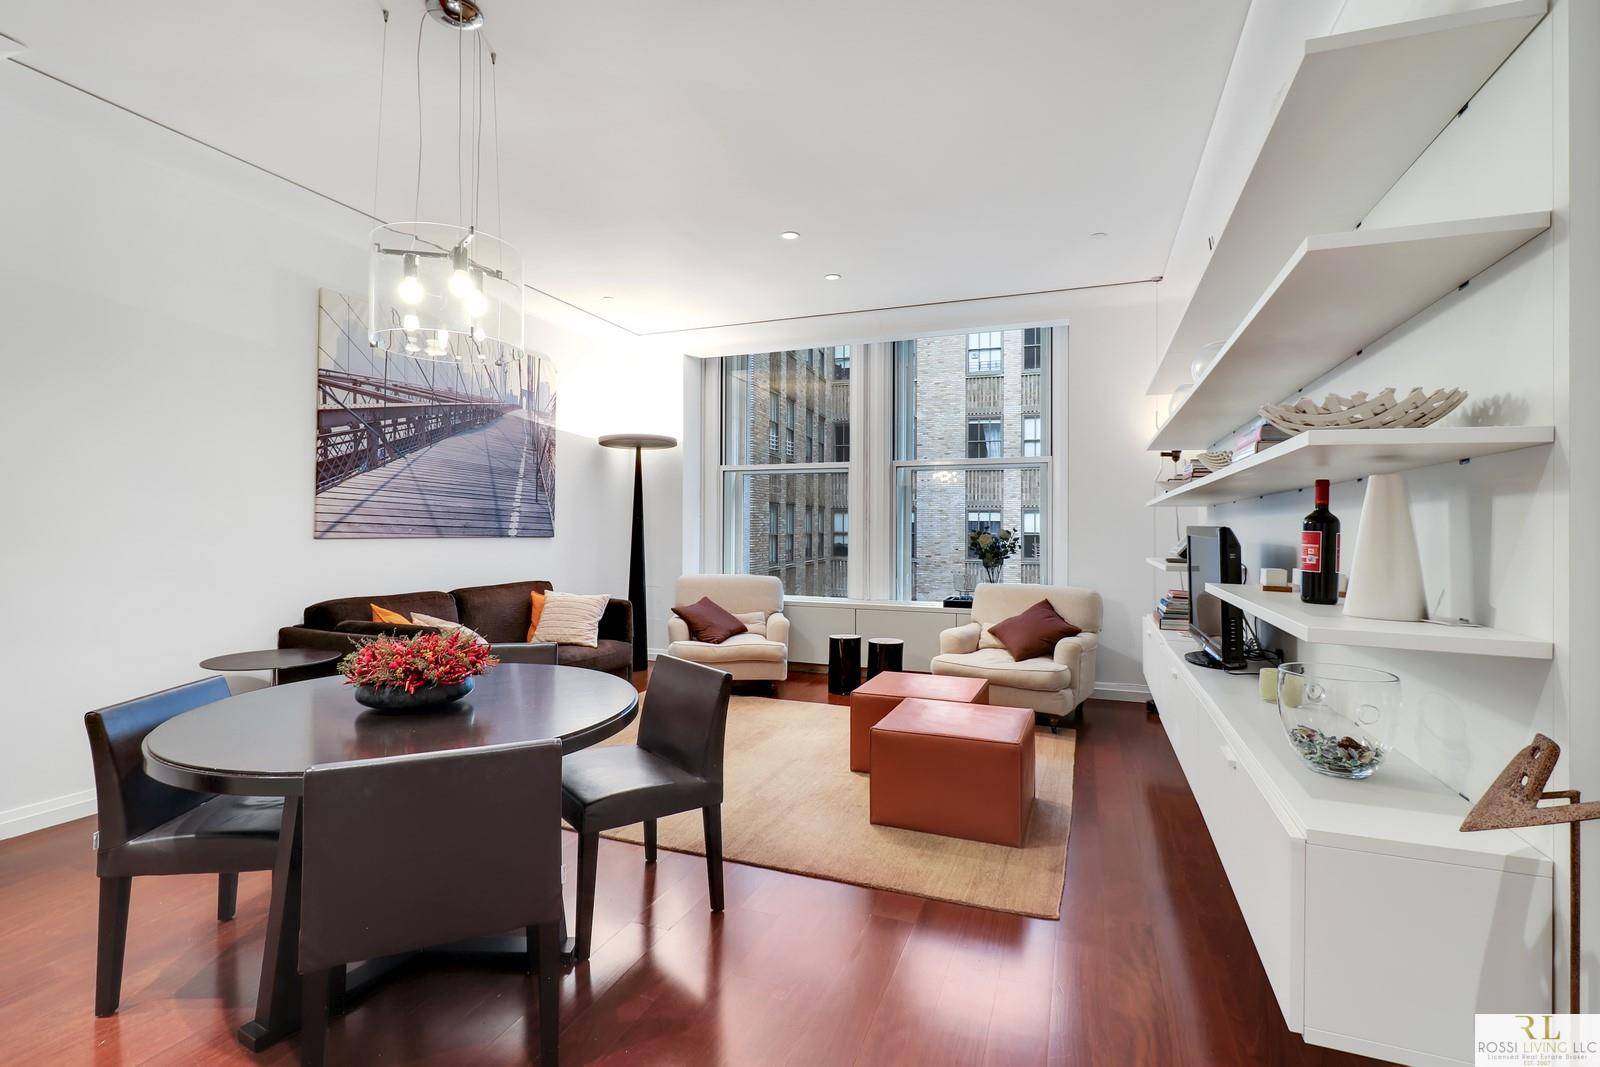 Tastefully furnished suite for rent at 55 Wall Street Condominium, an impeccable luxury building in the Financial District.